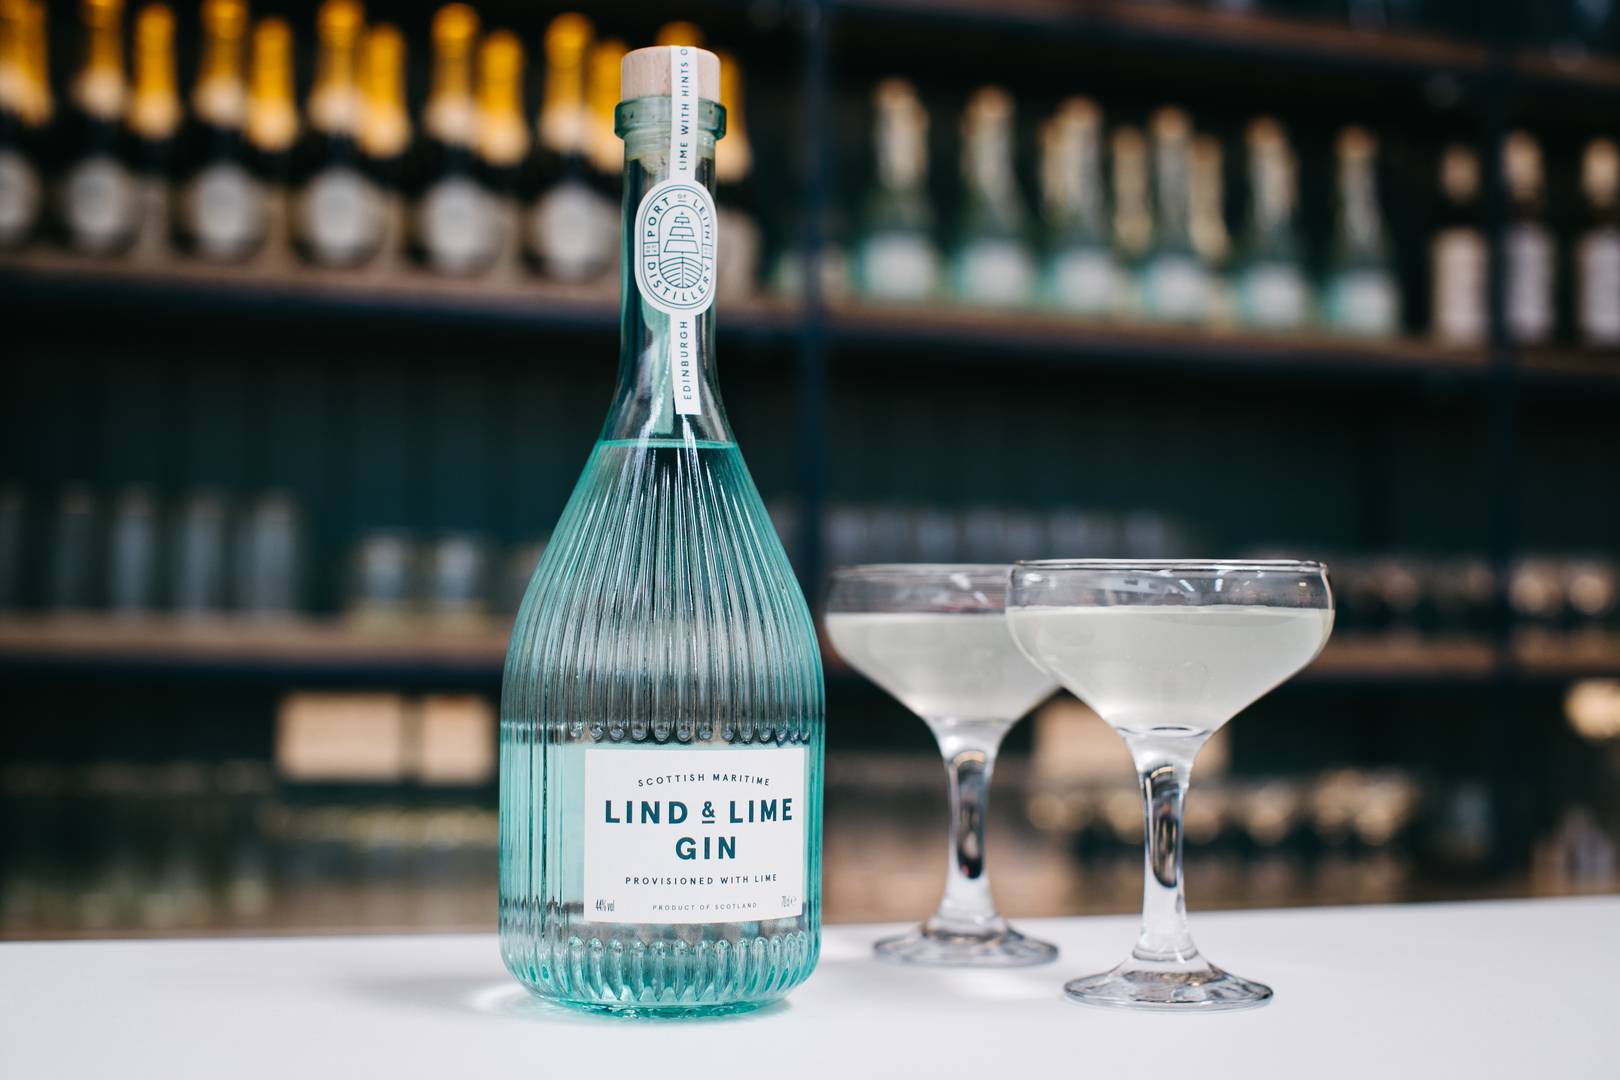 Lind & Lime Gin bottle and Gimlet cocktails,© All Copyright Reserved